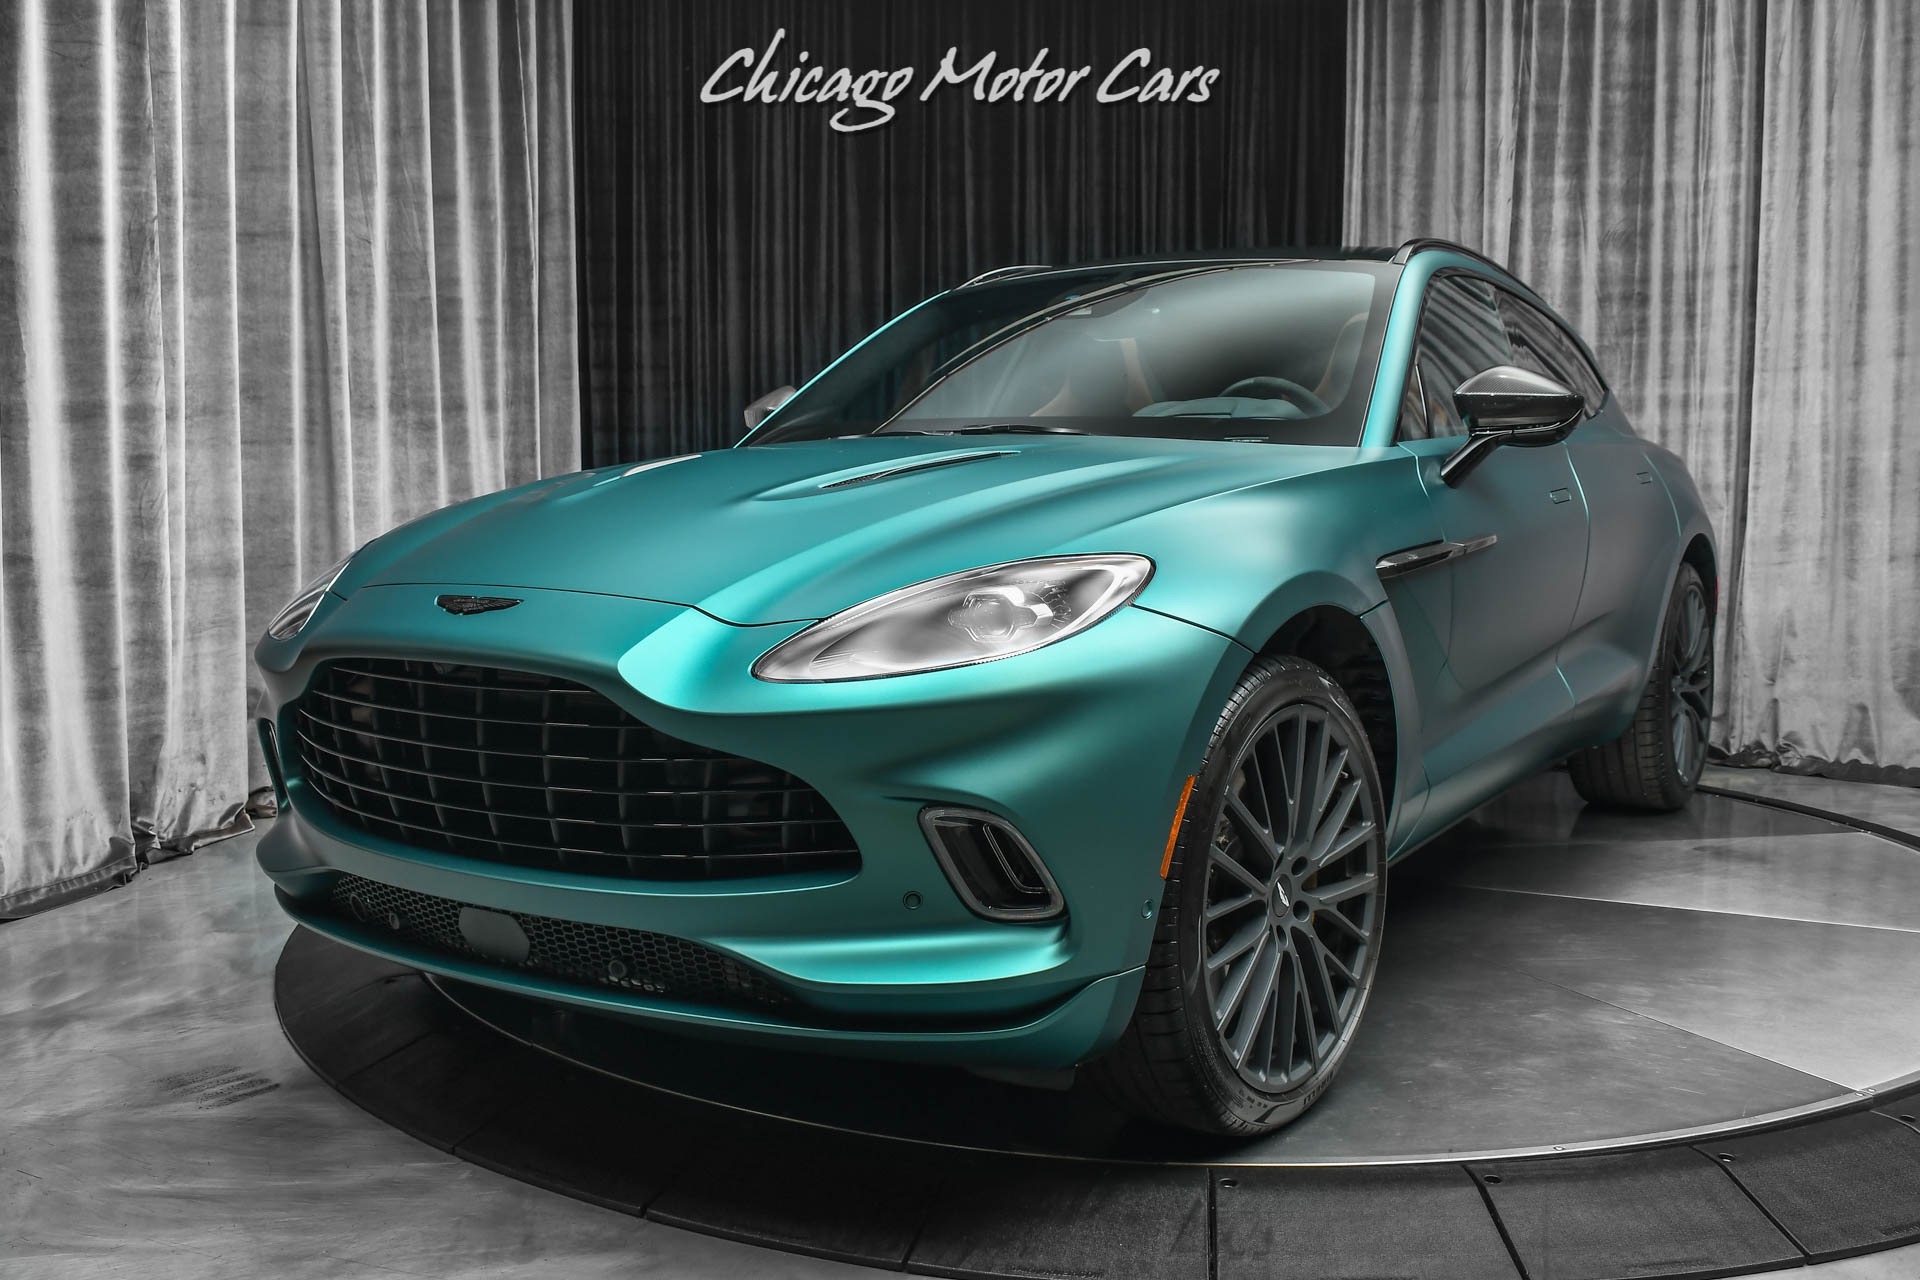 Used-2022-Aston-Martin-DBX-SUV-ONLY-306-Miles-Satin-Racing-Green-TONS-of-Carbon-HOT-Spec-HUGE-MSRP